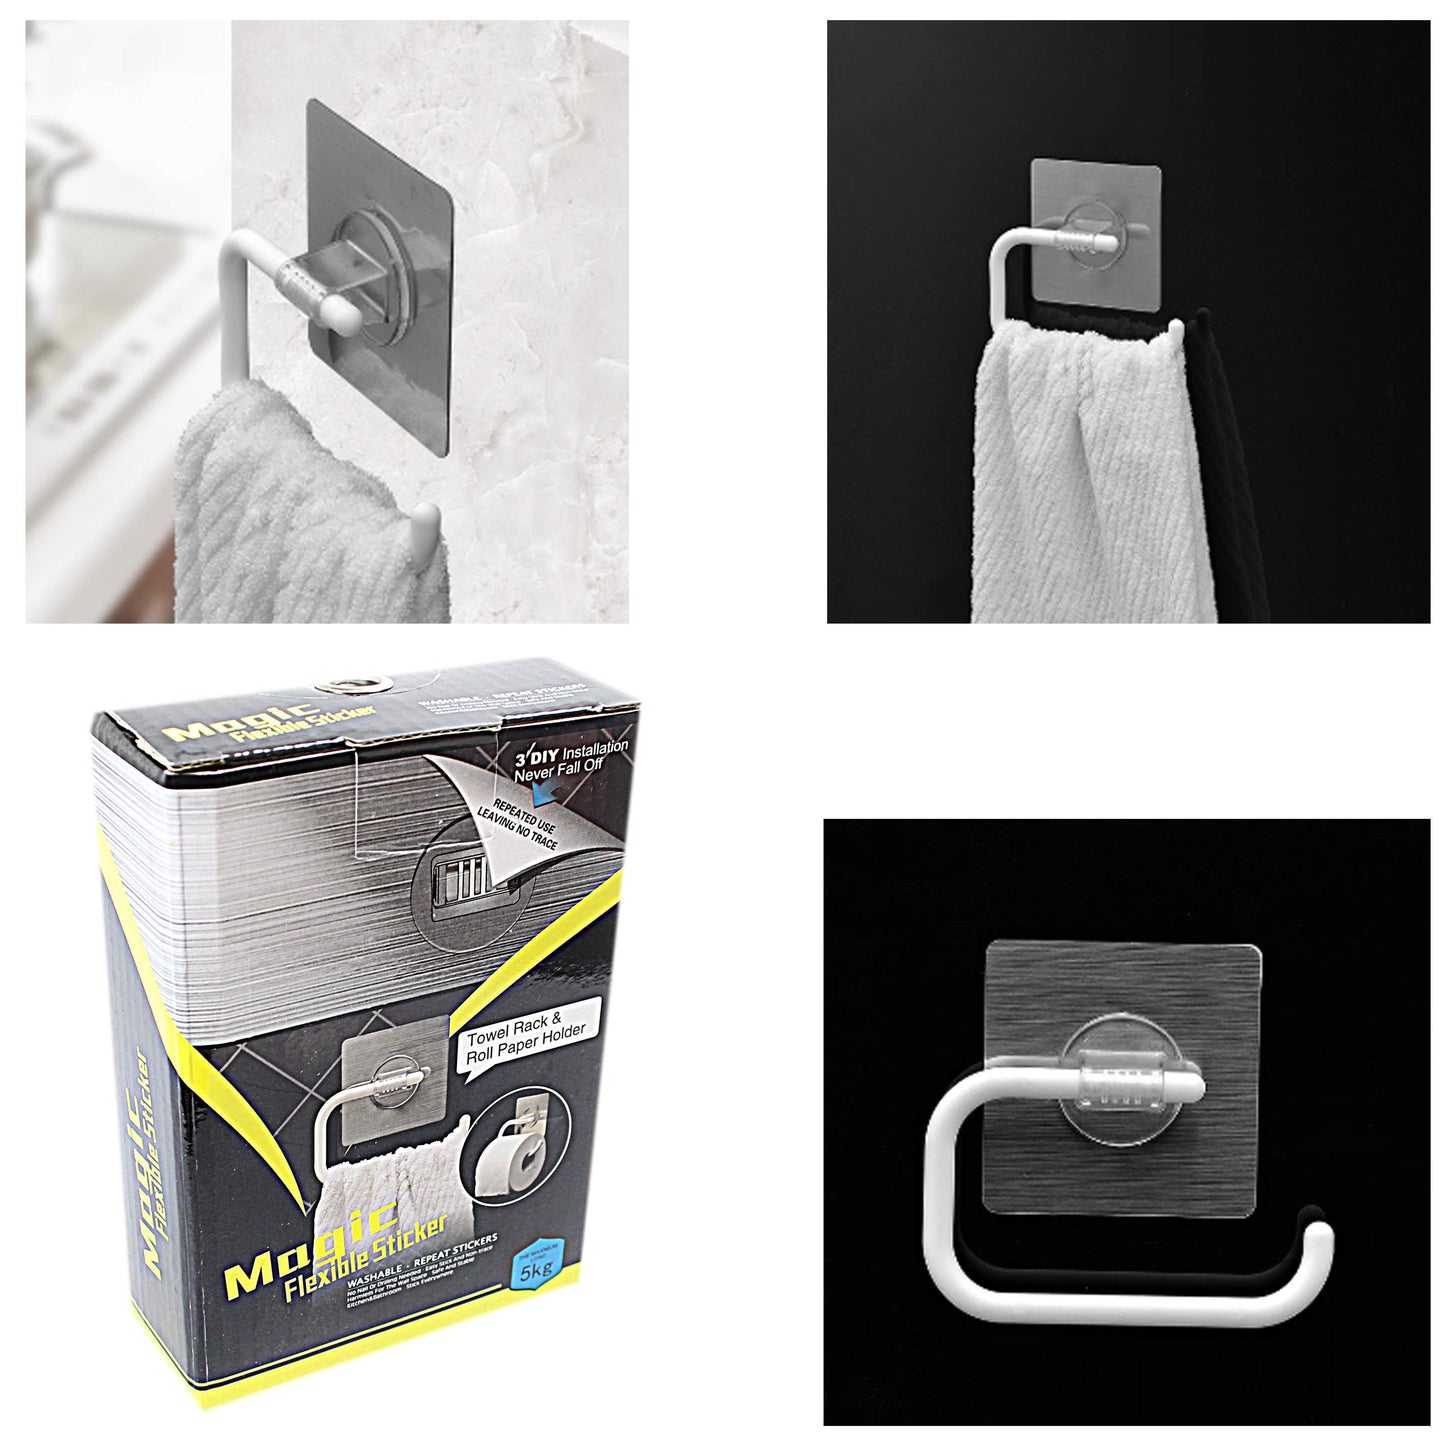 Towel And Paper Roll Bathroom Holder DIY Easy Installation Max Hold 5kg 1881 (Parcel Rate)